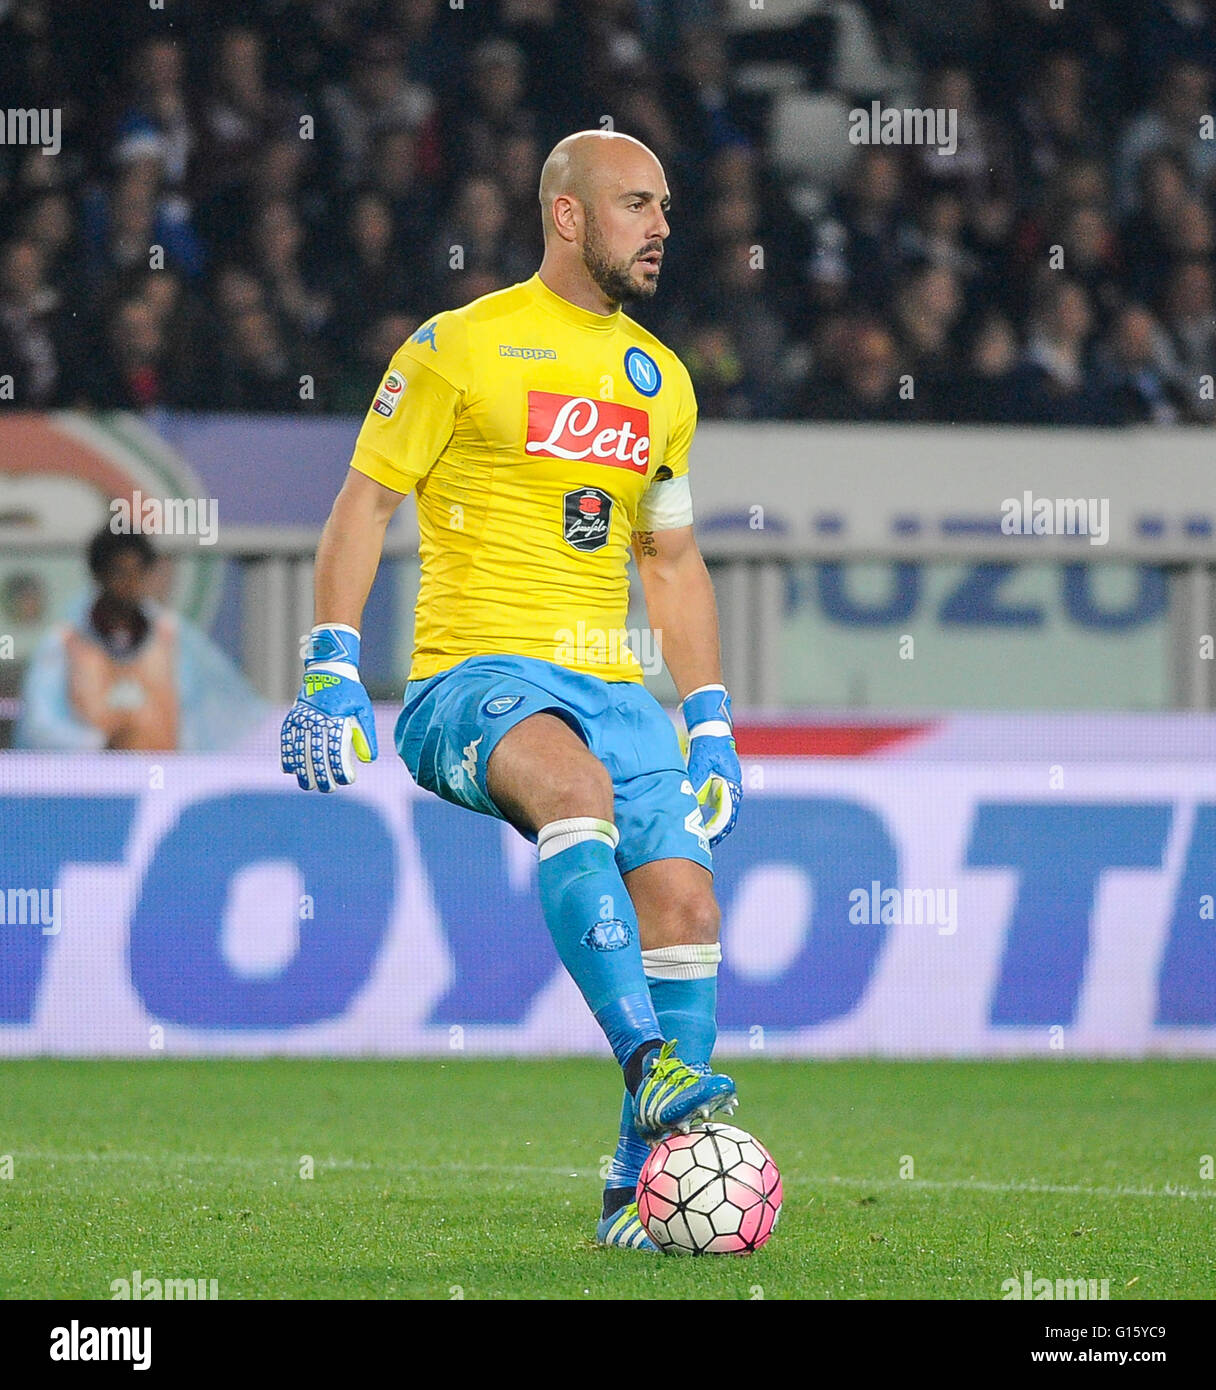 Turin, Italy. 8 may, 2016: José Manuel Reina in action during the Serie A football match between Torino FC and SSC Napoli Stock Photo